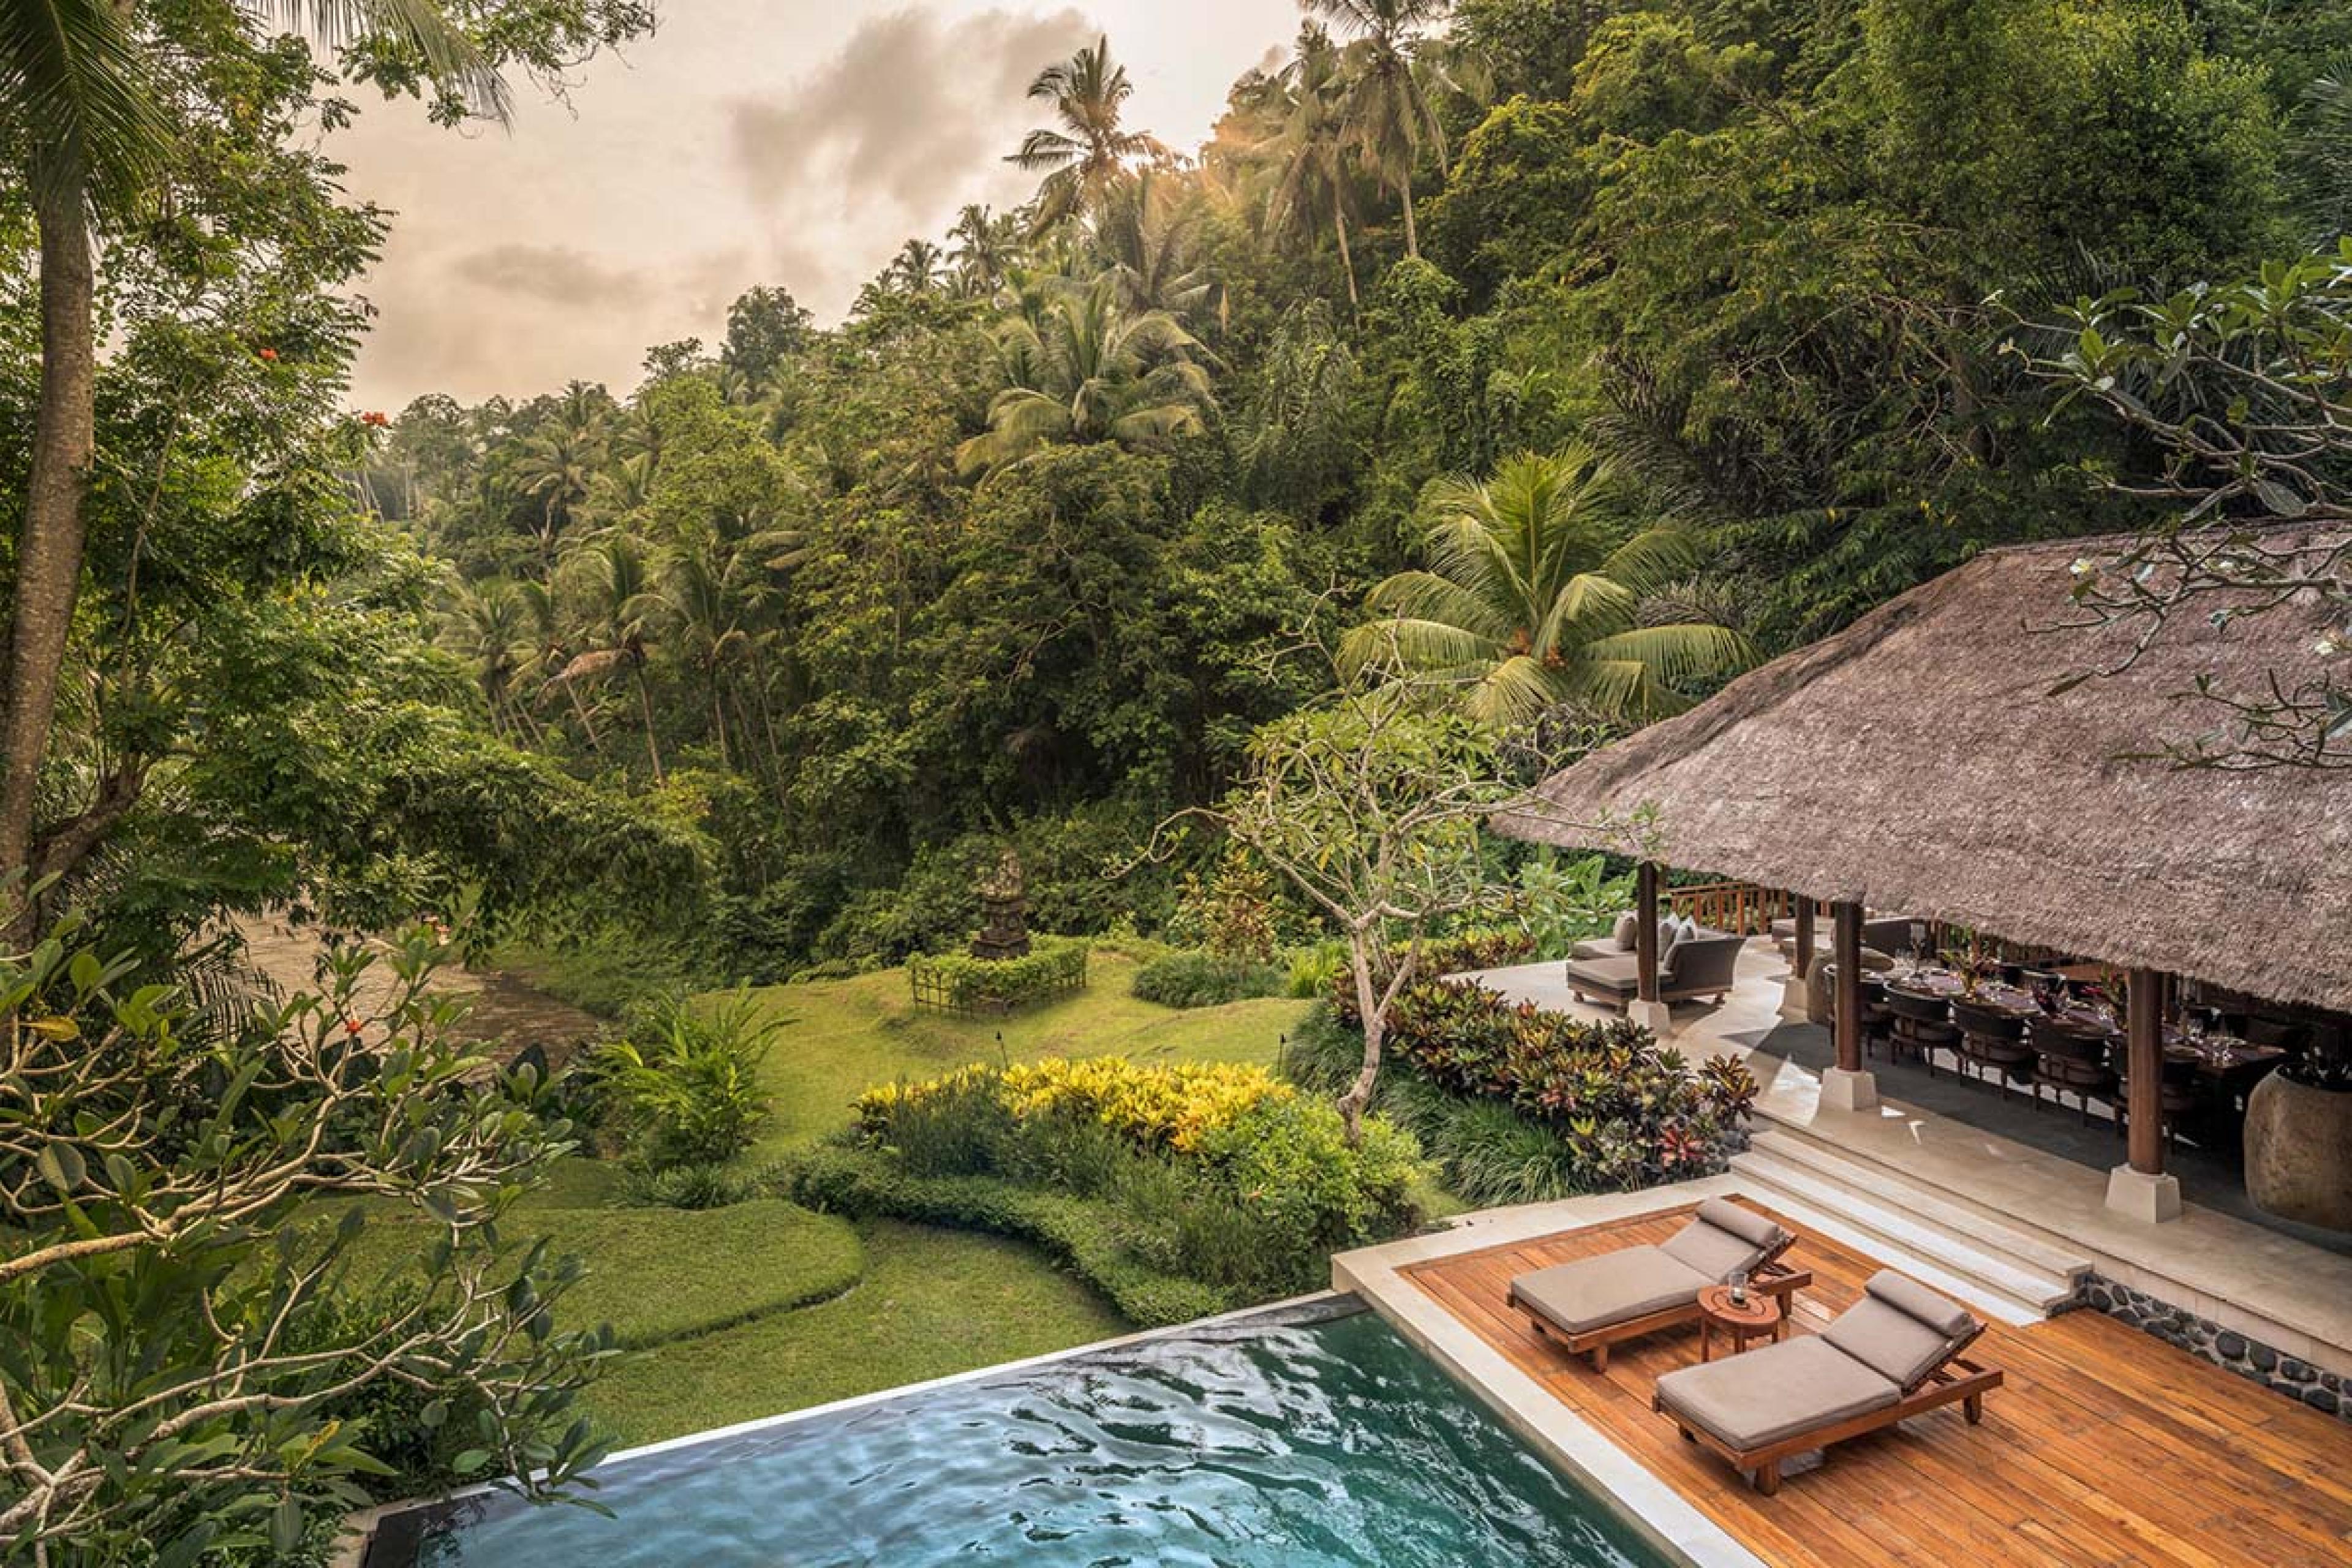 thatched roof cottage with a plunge pool looking out on a green jungle